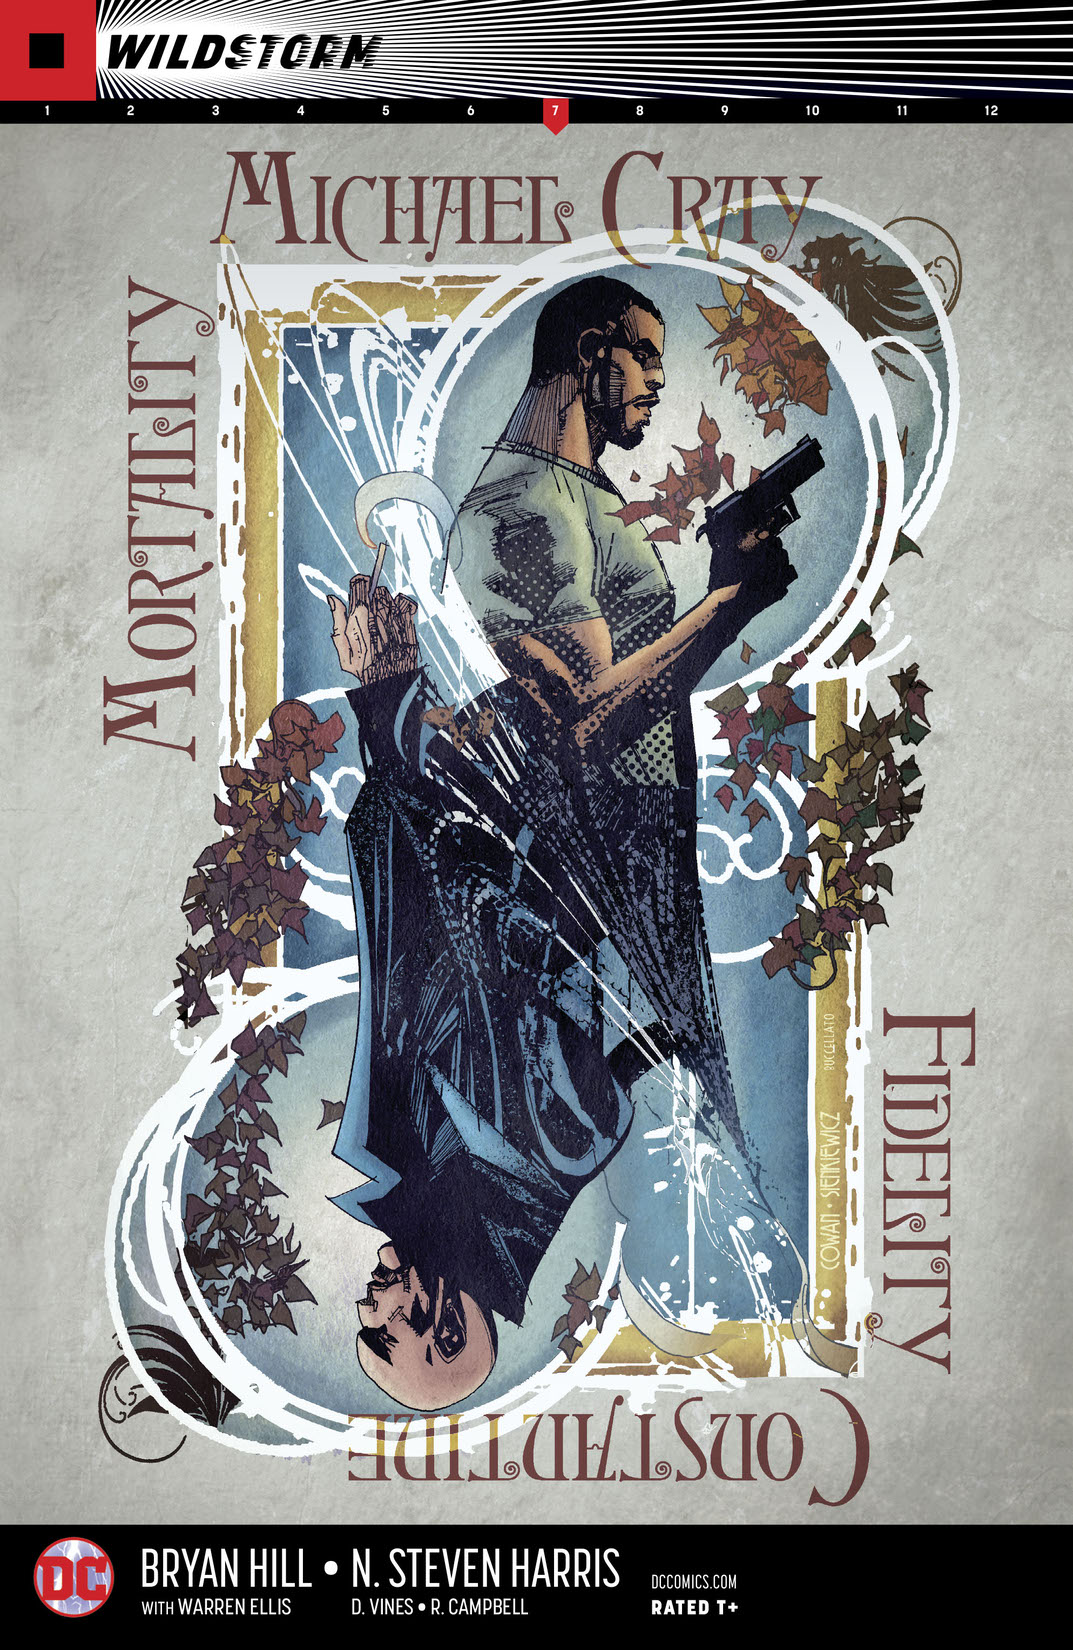 The Wild Storm: Michael Cray #7 preview images